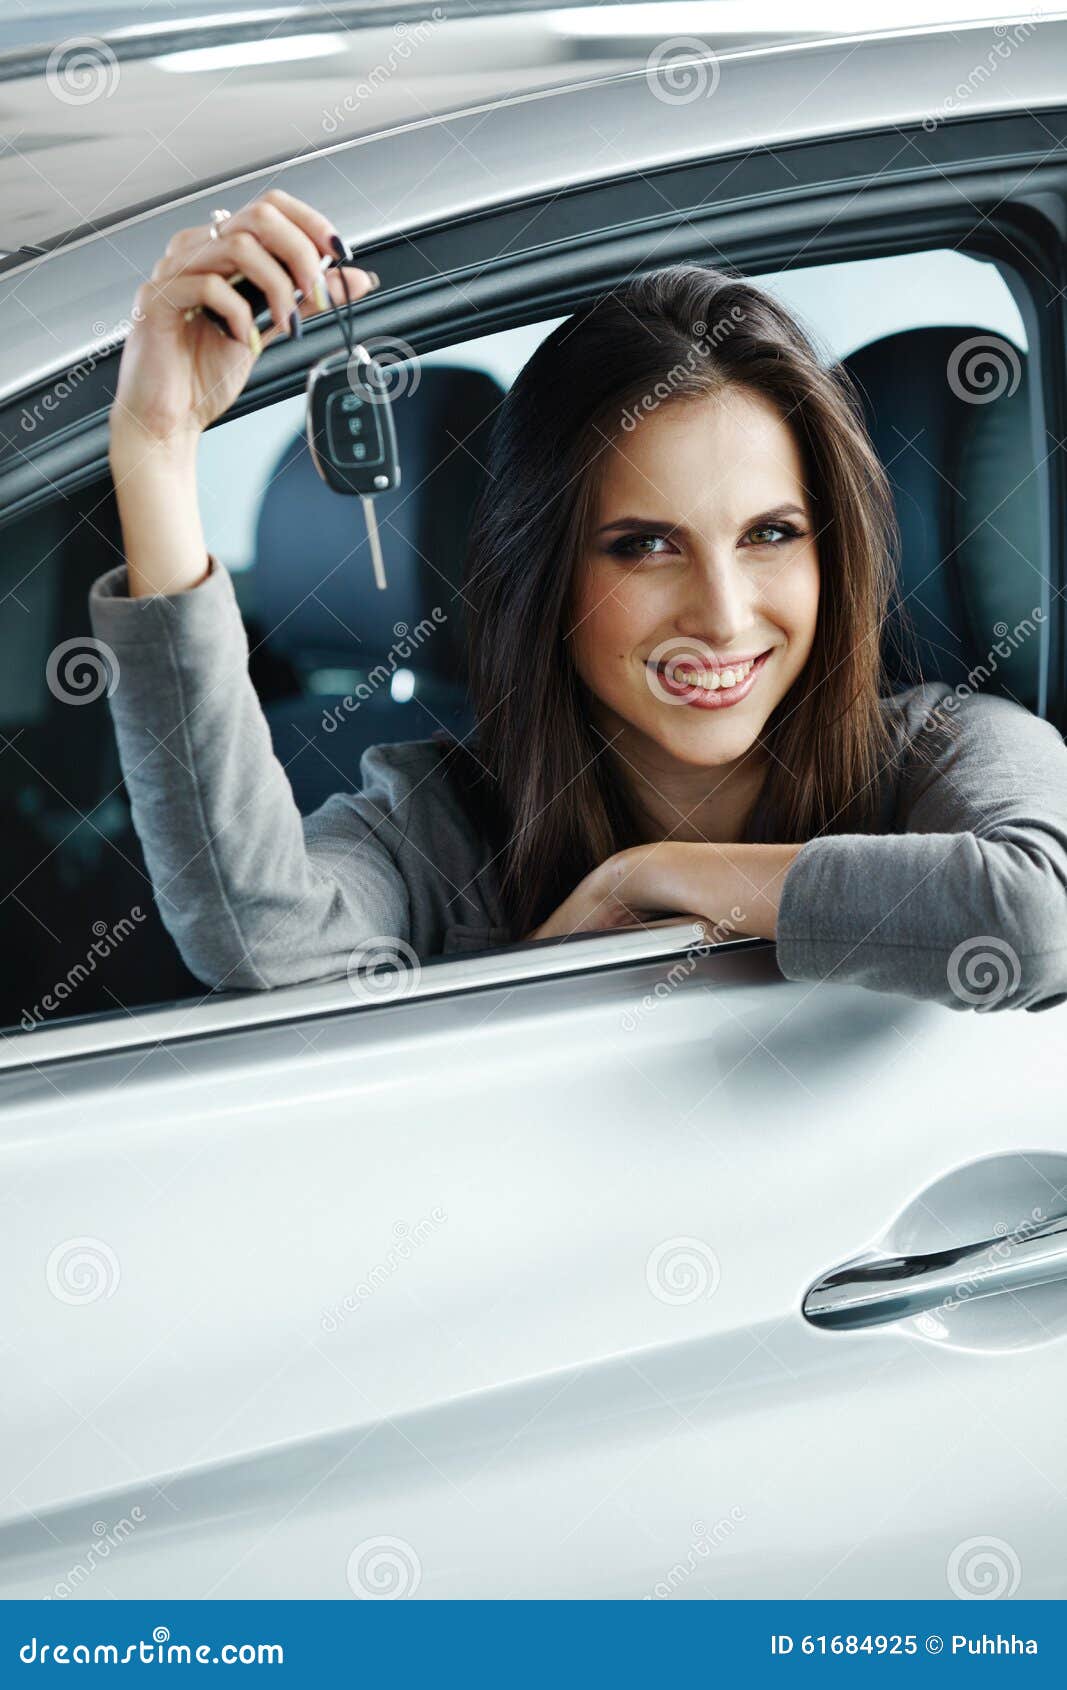 woman driver holding car keys siting in her new car.